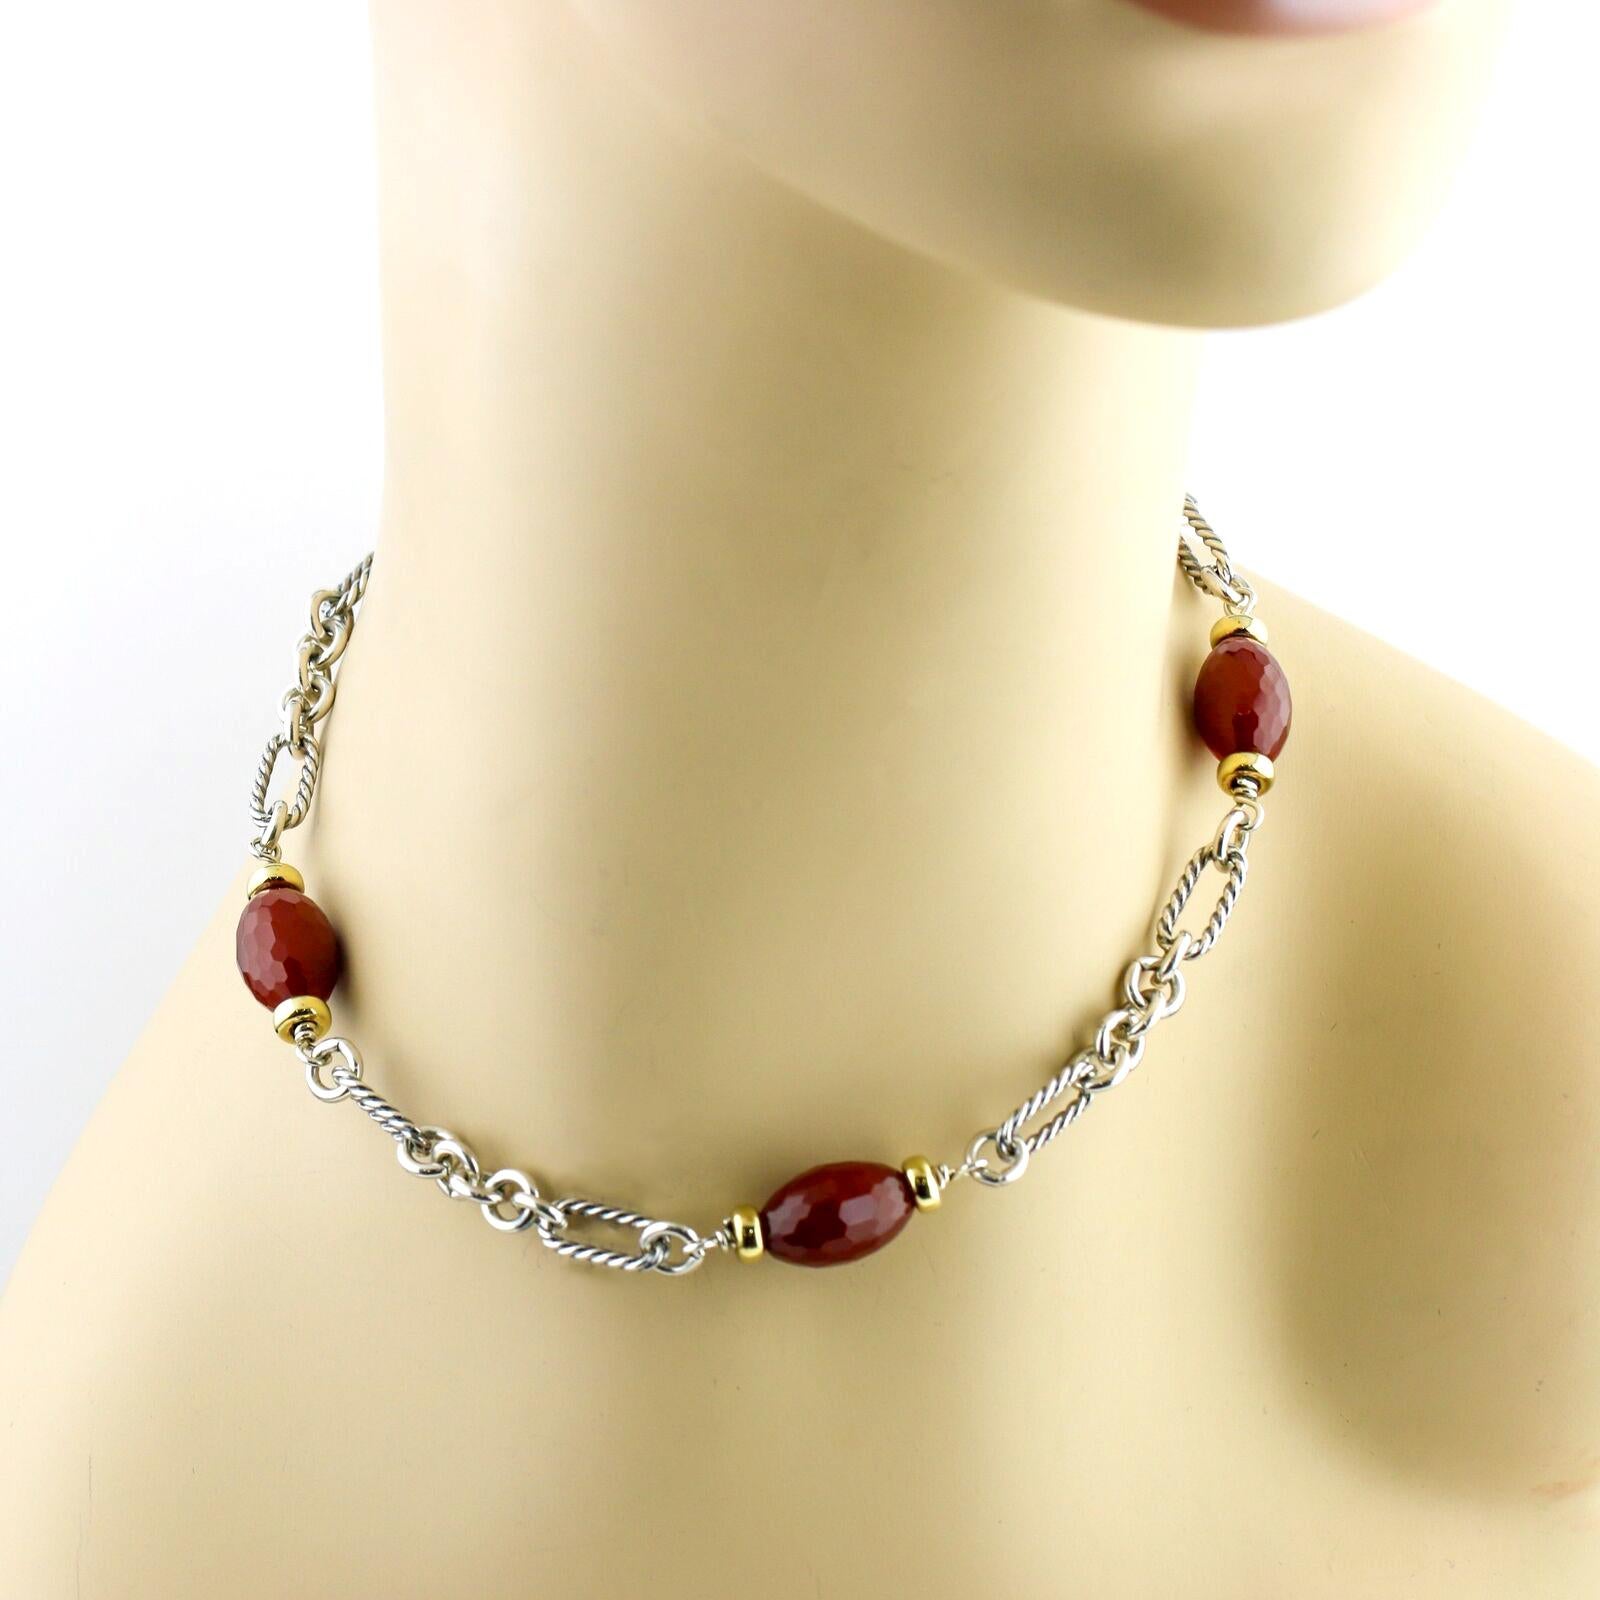 David Yurman Figaro Link Carnelian Bijoux Sterling Silver Necklace with 18k Gold In Good Condition For Sale In Fort Lauderdale, FL